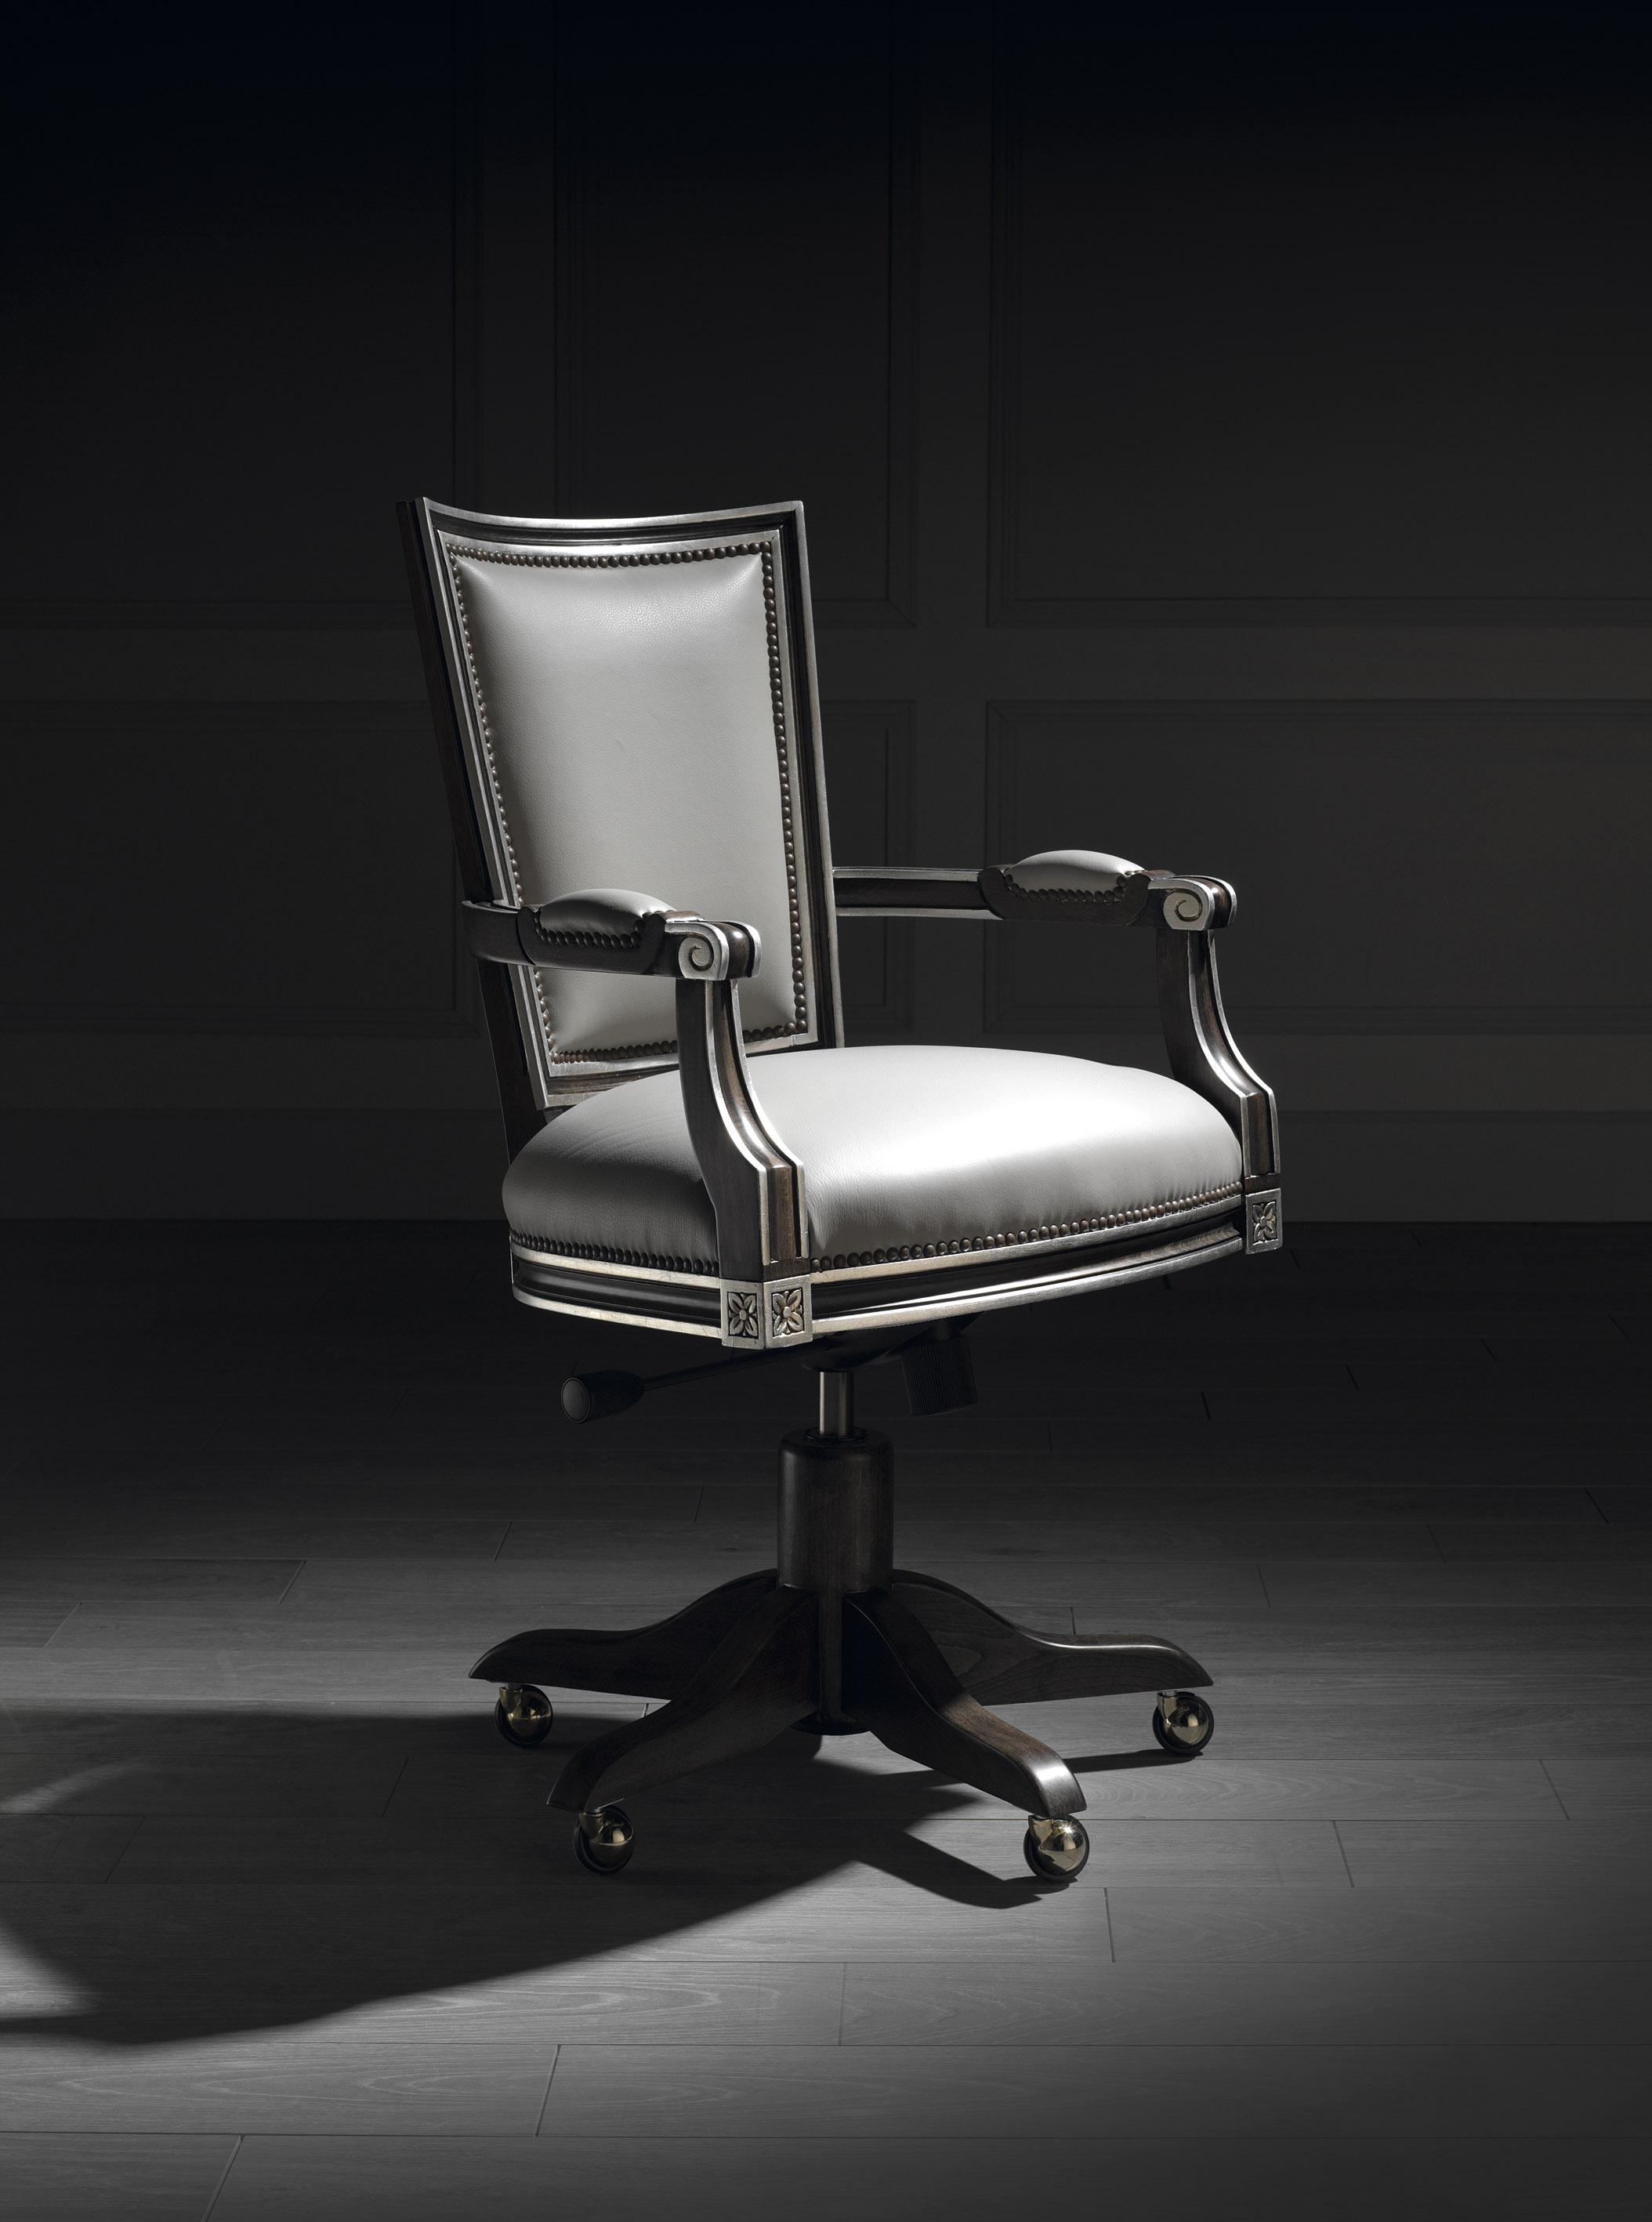 office chairs uk, office desk, home office chairs, luxury office chairs